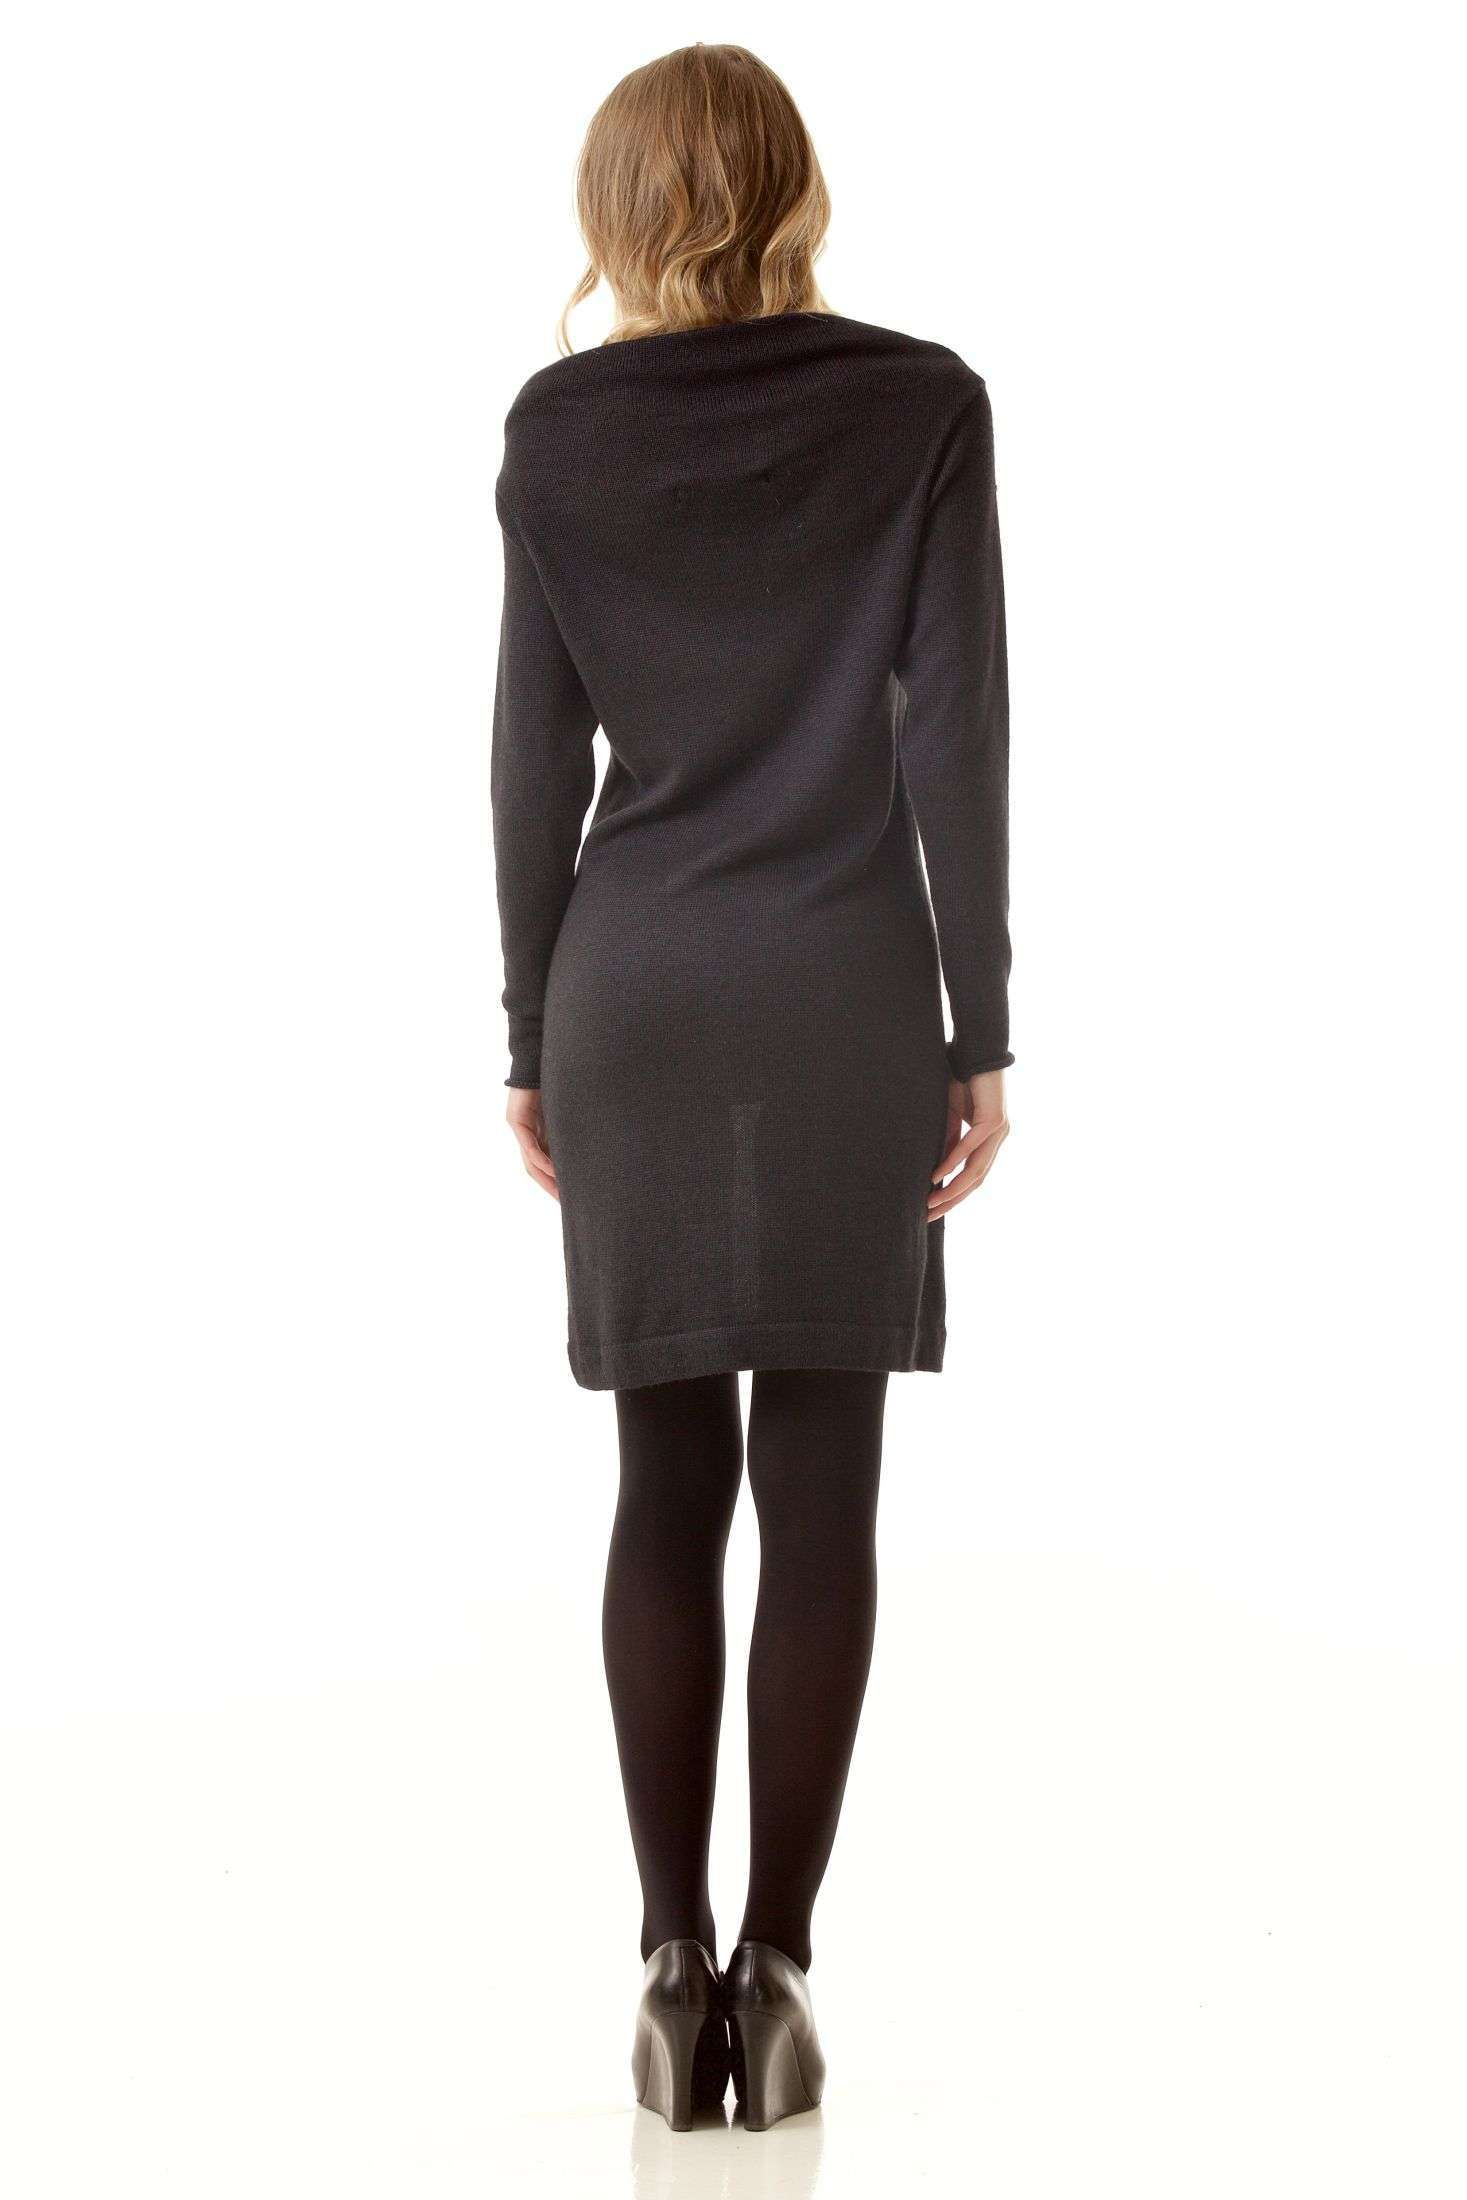 Black knit dress PATRICIA by Krista Elsta pictured from back